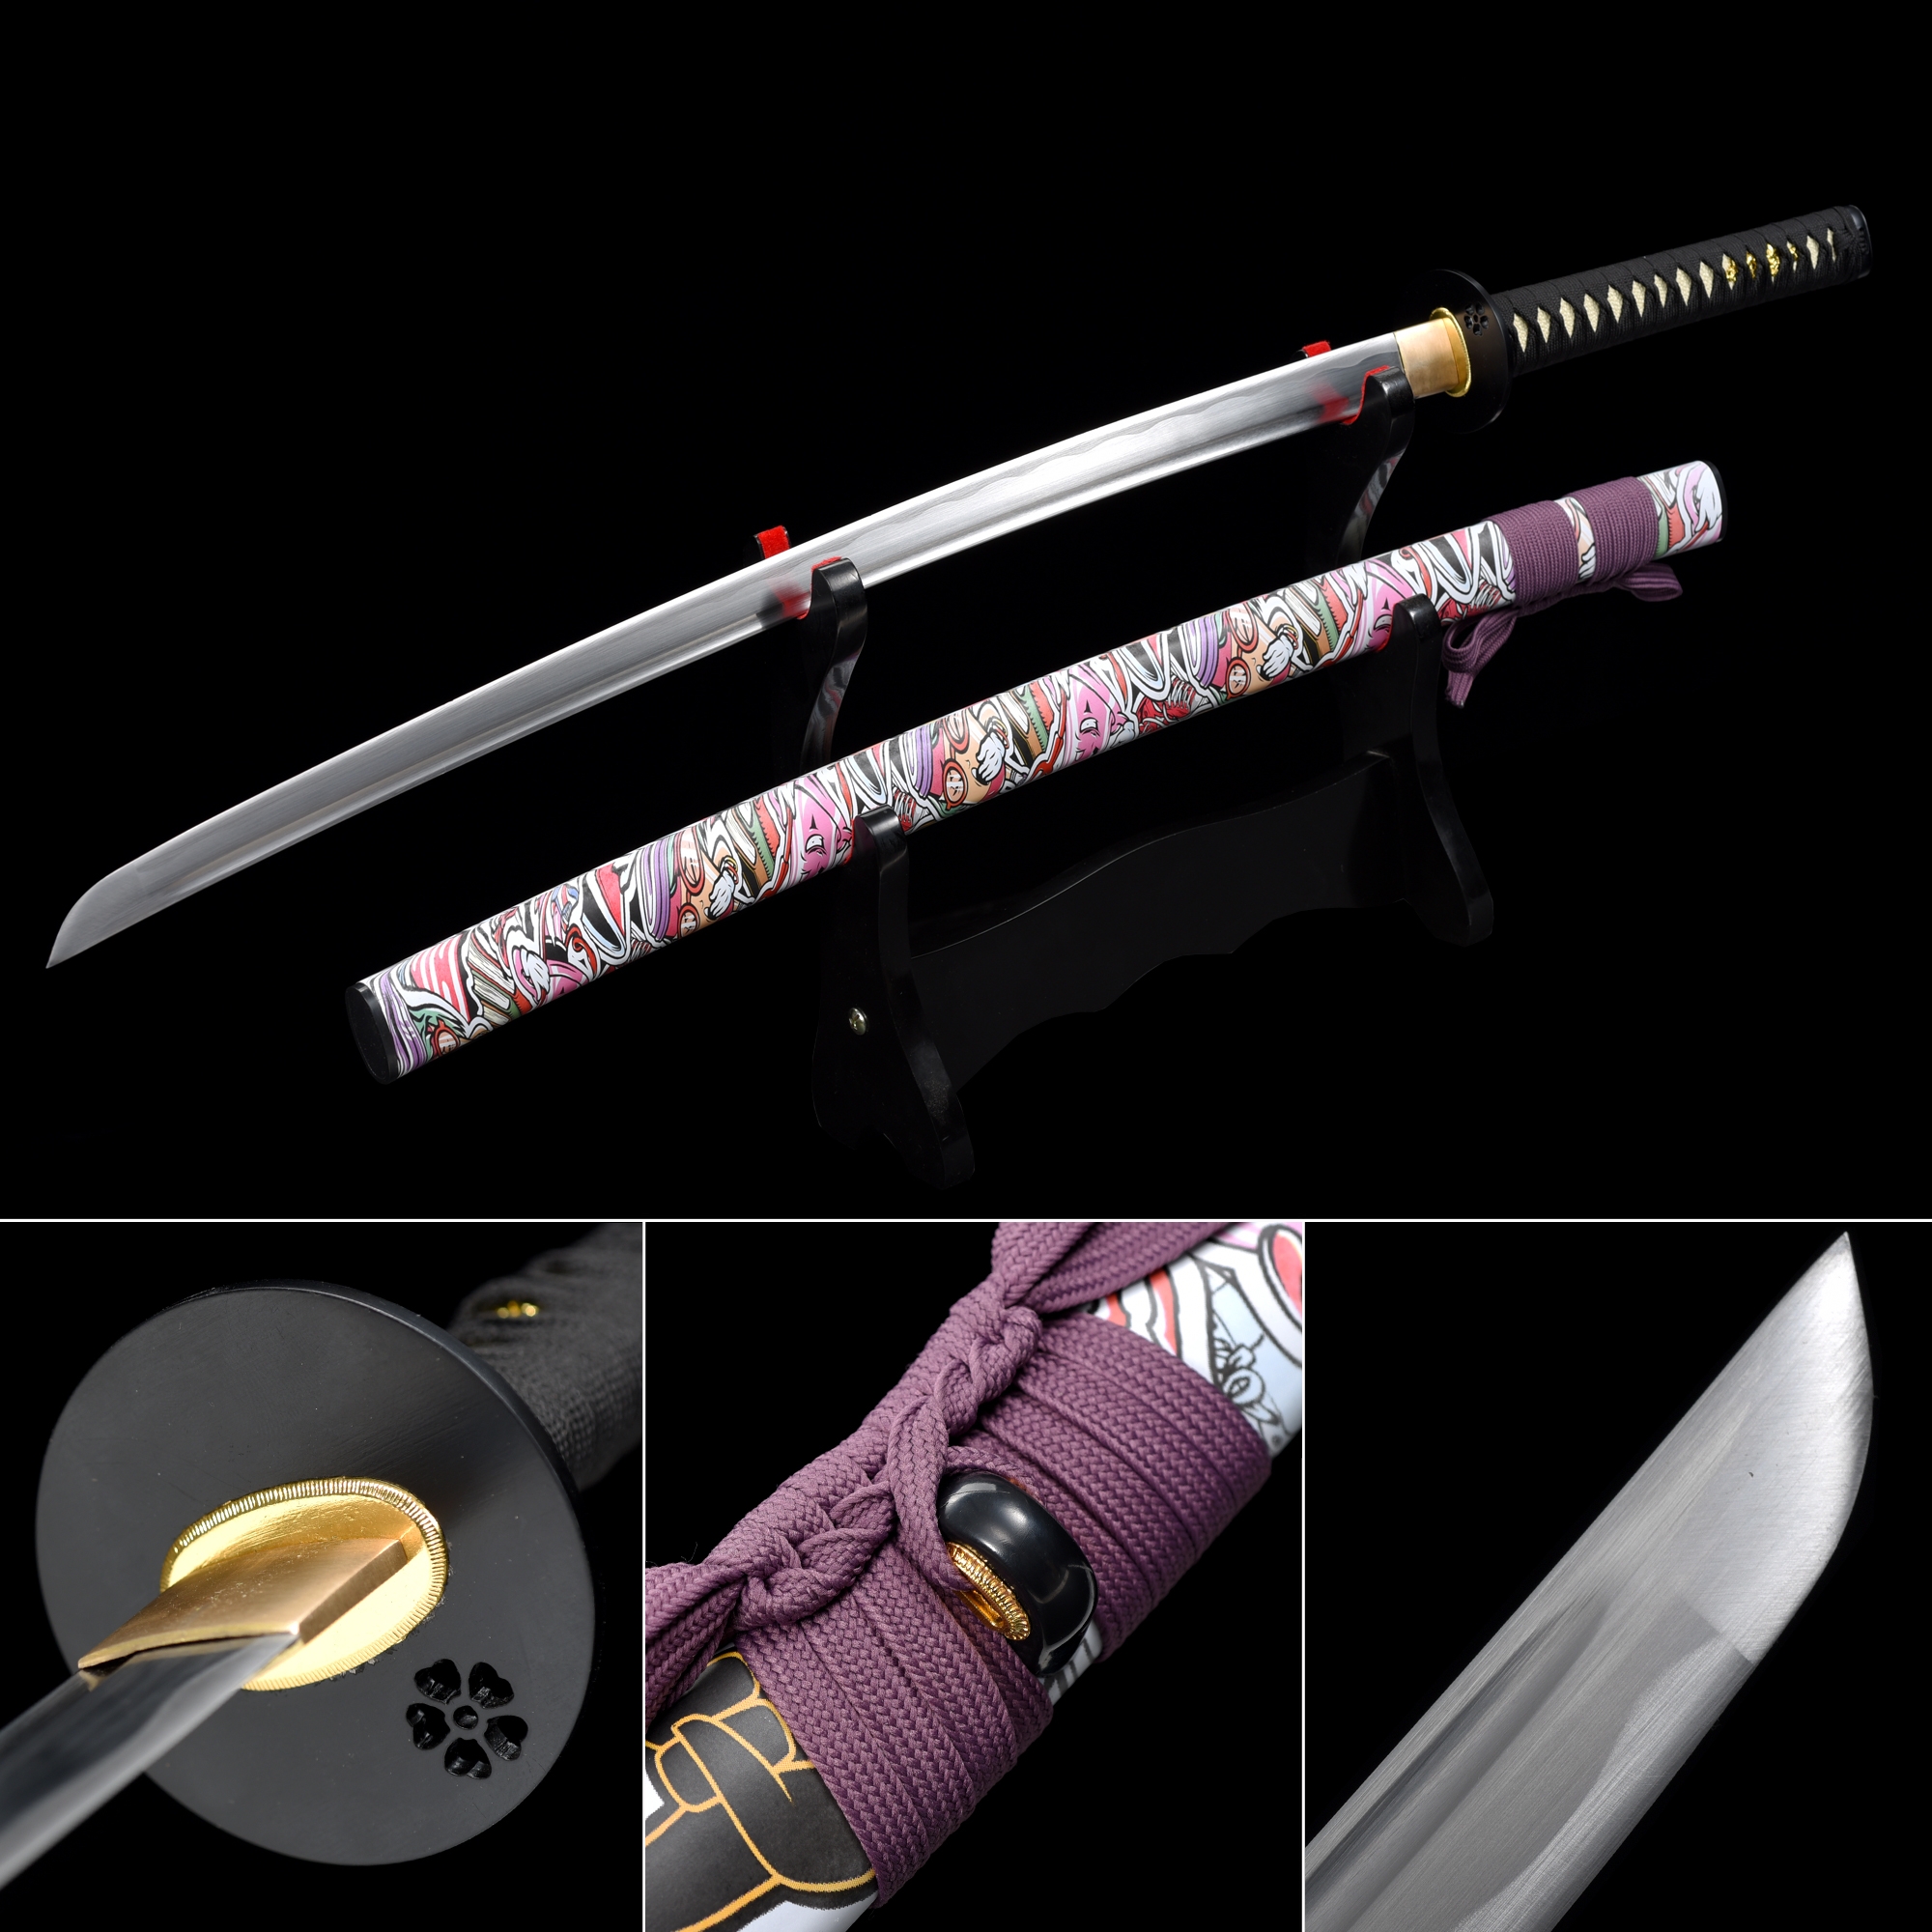 Handmade 1060 Carbon Steel Real Japanese Katana Sword With Multi Colored Scabbard And Alloy